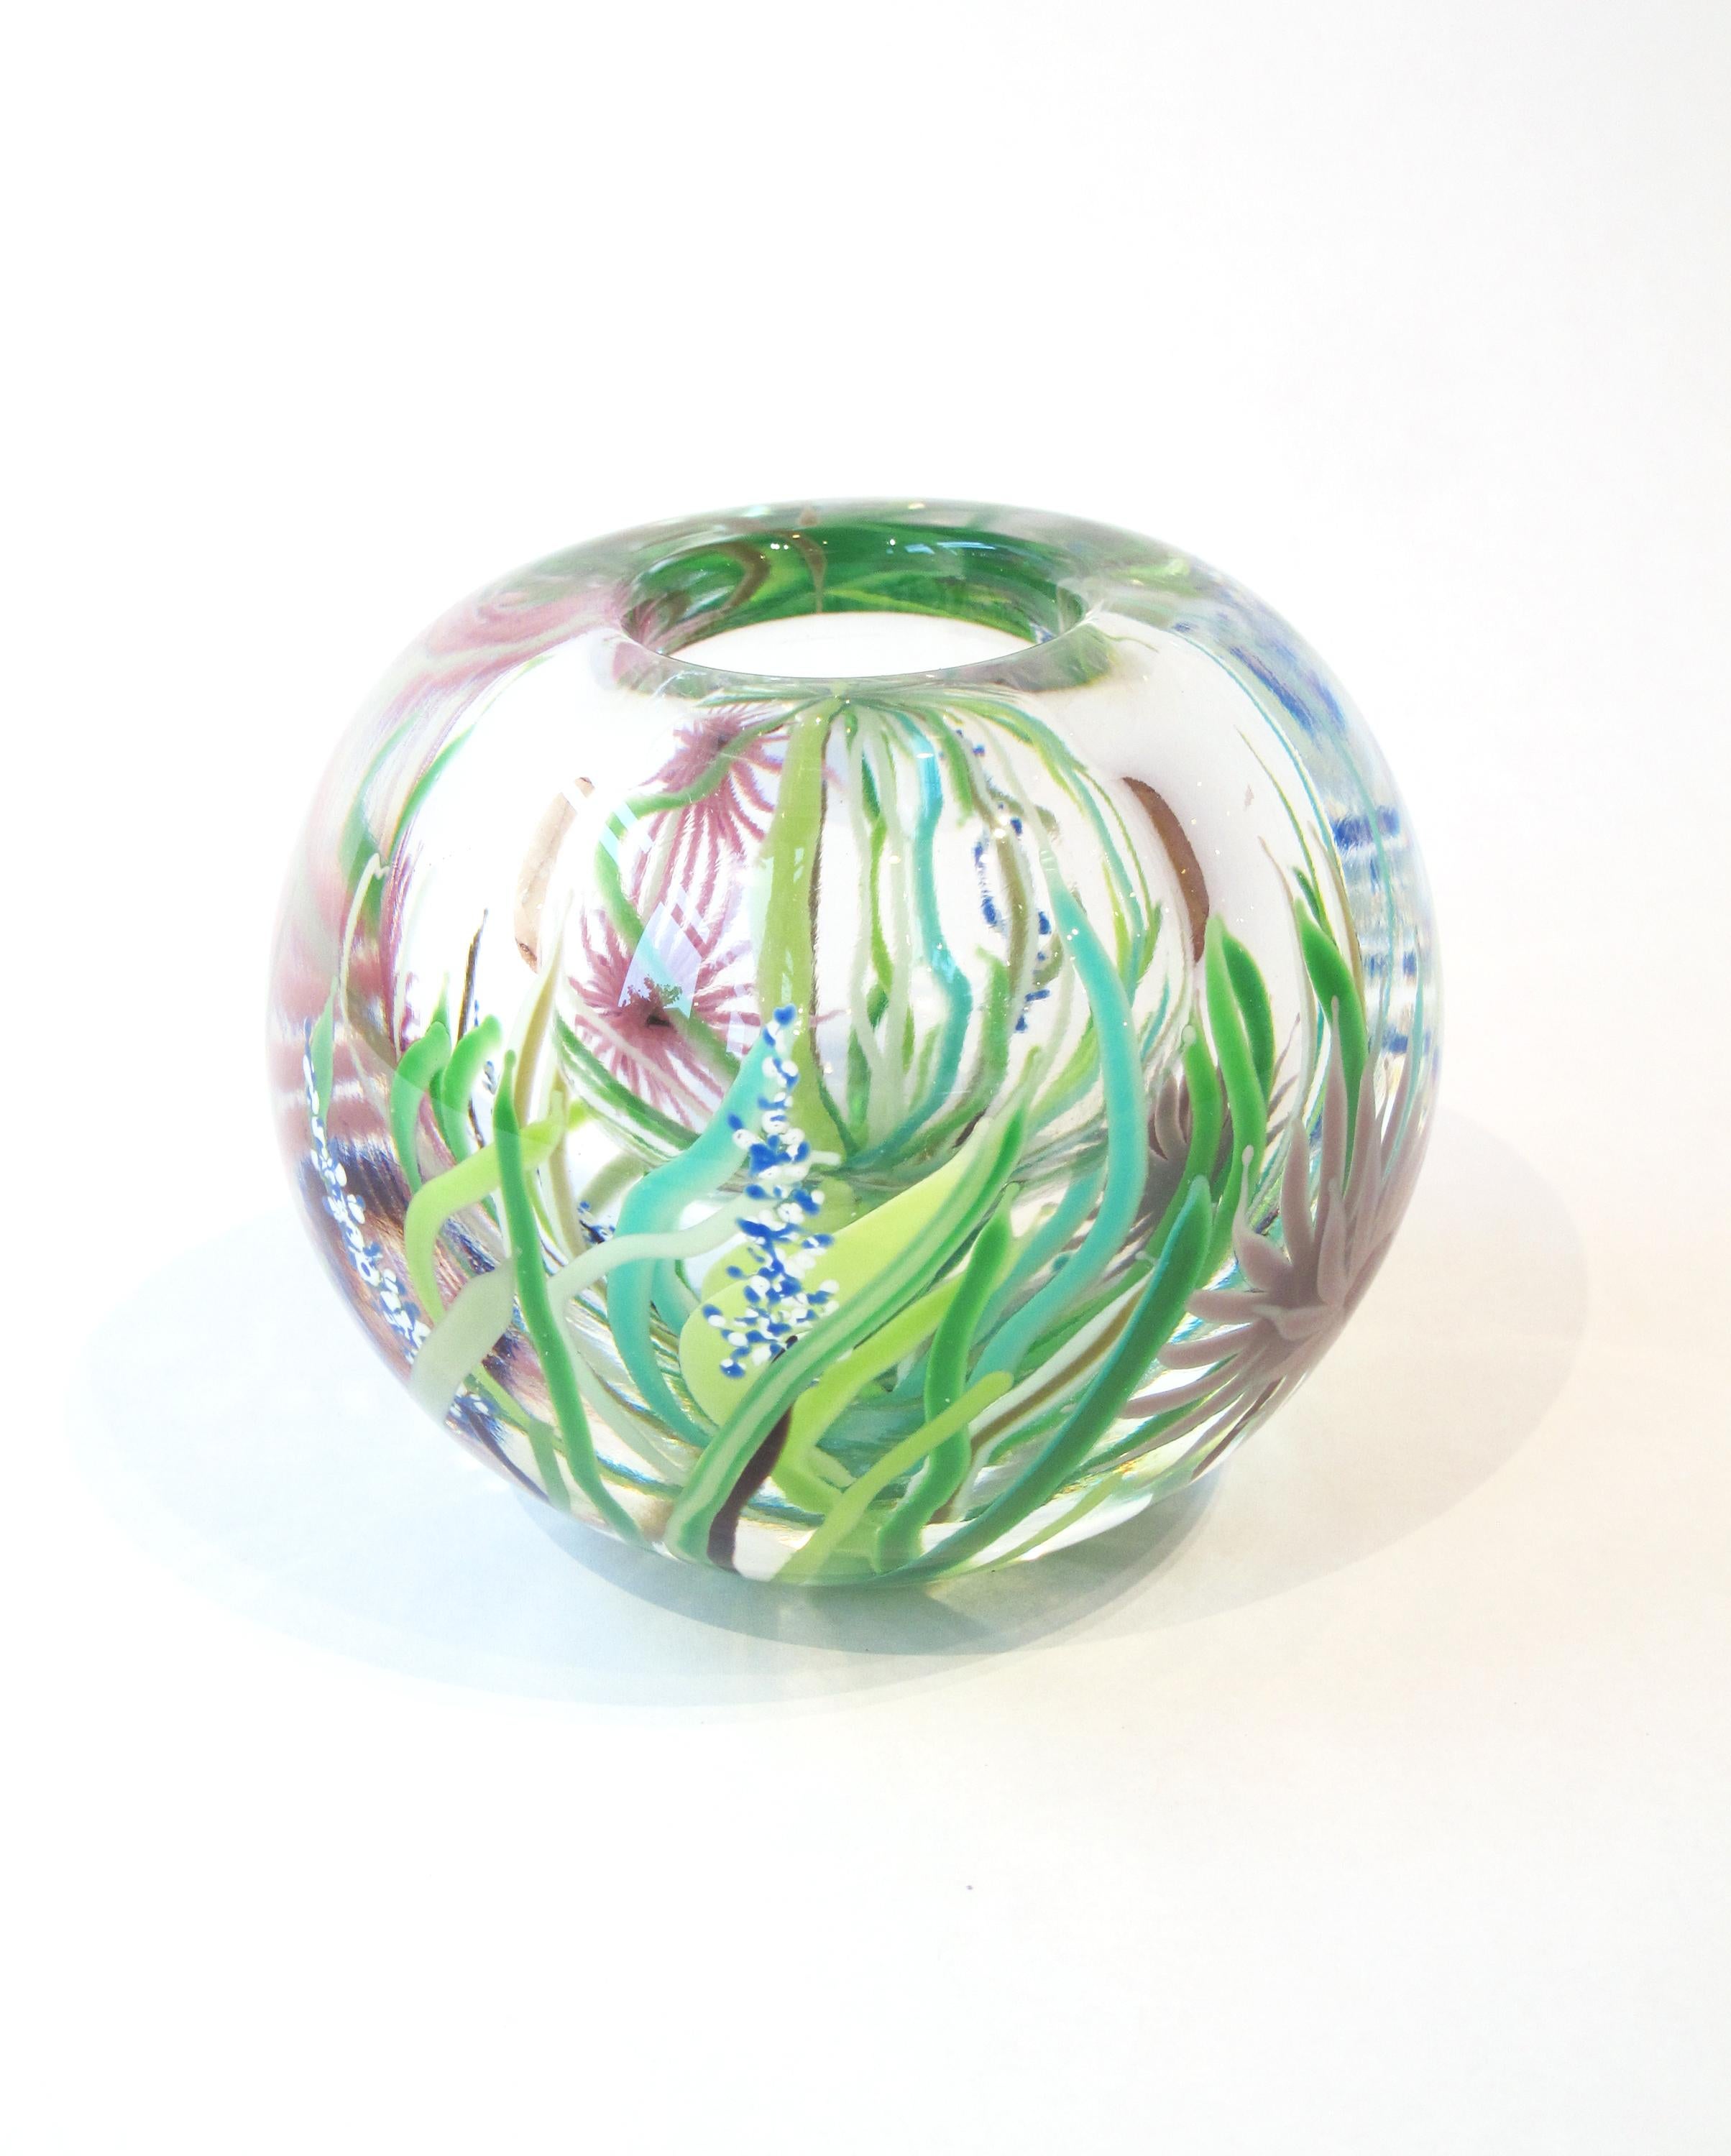 20th Century Blown Glass Paperweight Vase by David R. Huchthausen, 1980 For Sale